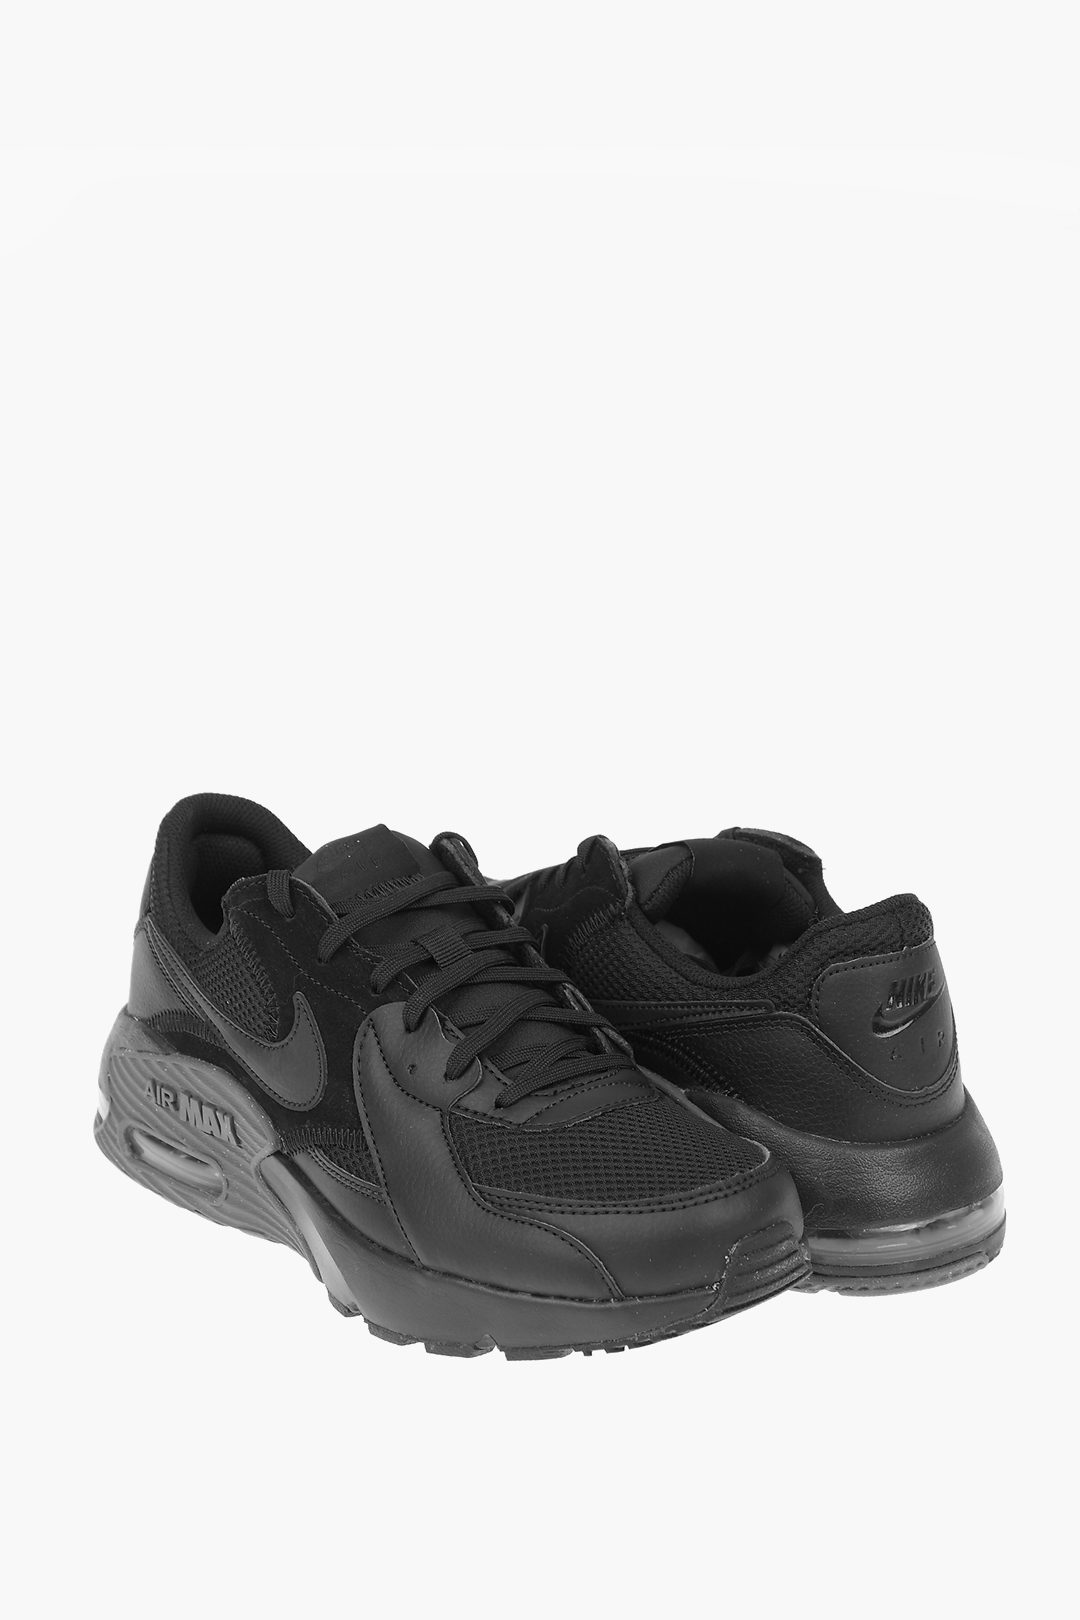 Nike | Mens Air Max Excee Trainers | Runners | SportsDirect.com